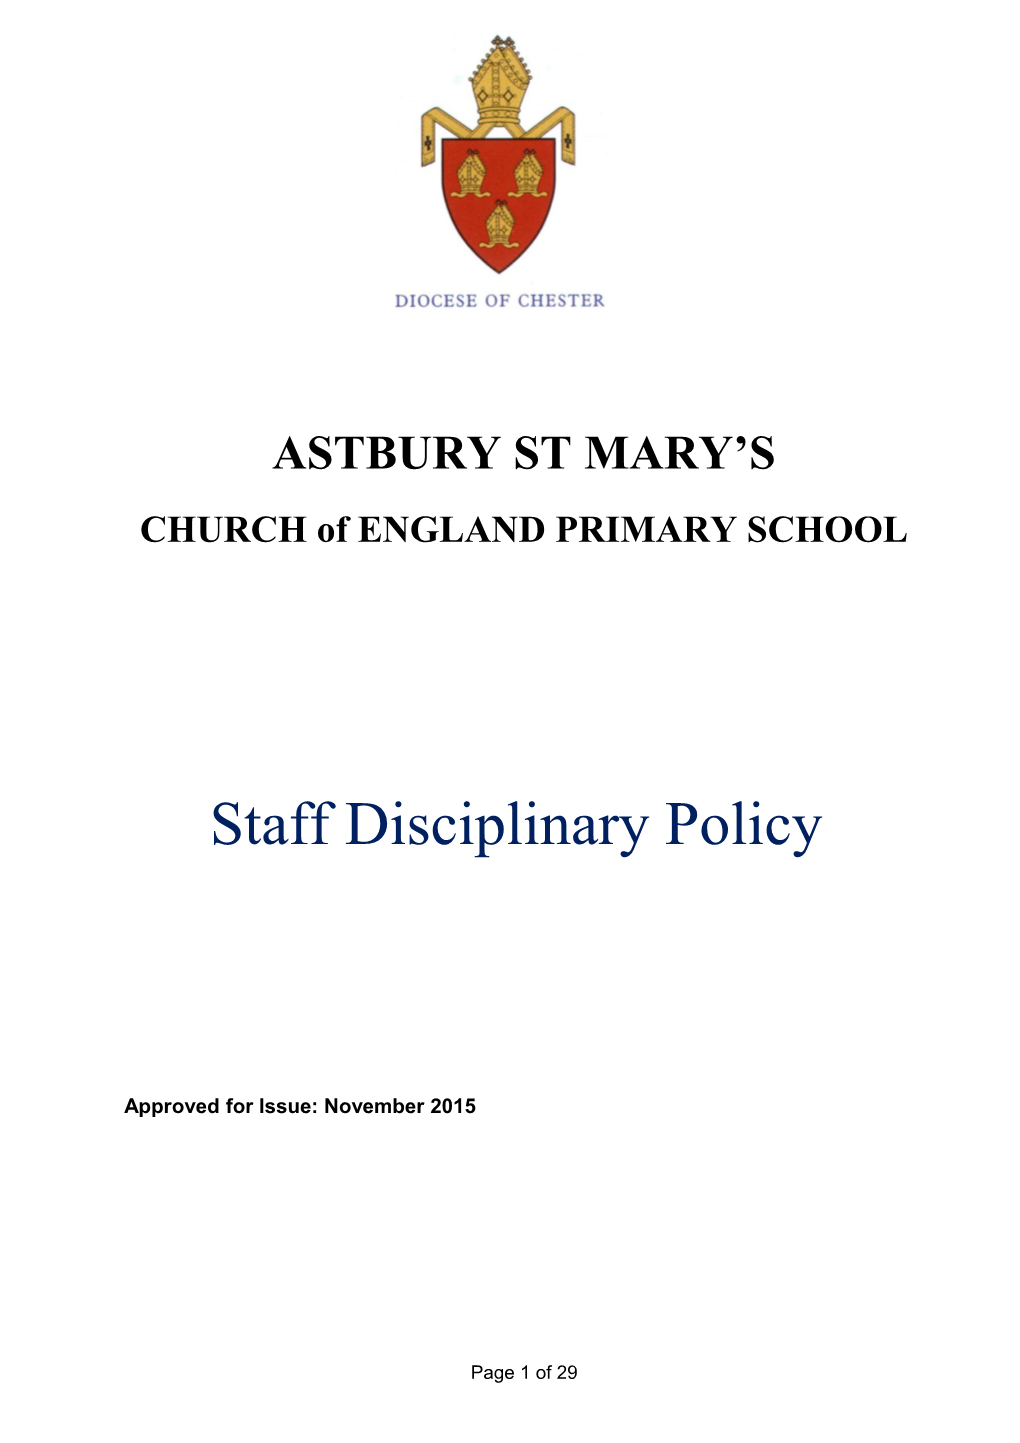 Model Disciplinary Policy for All School / Academy Staff (Education HR Policy: All Staff)